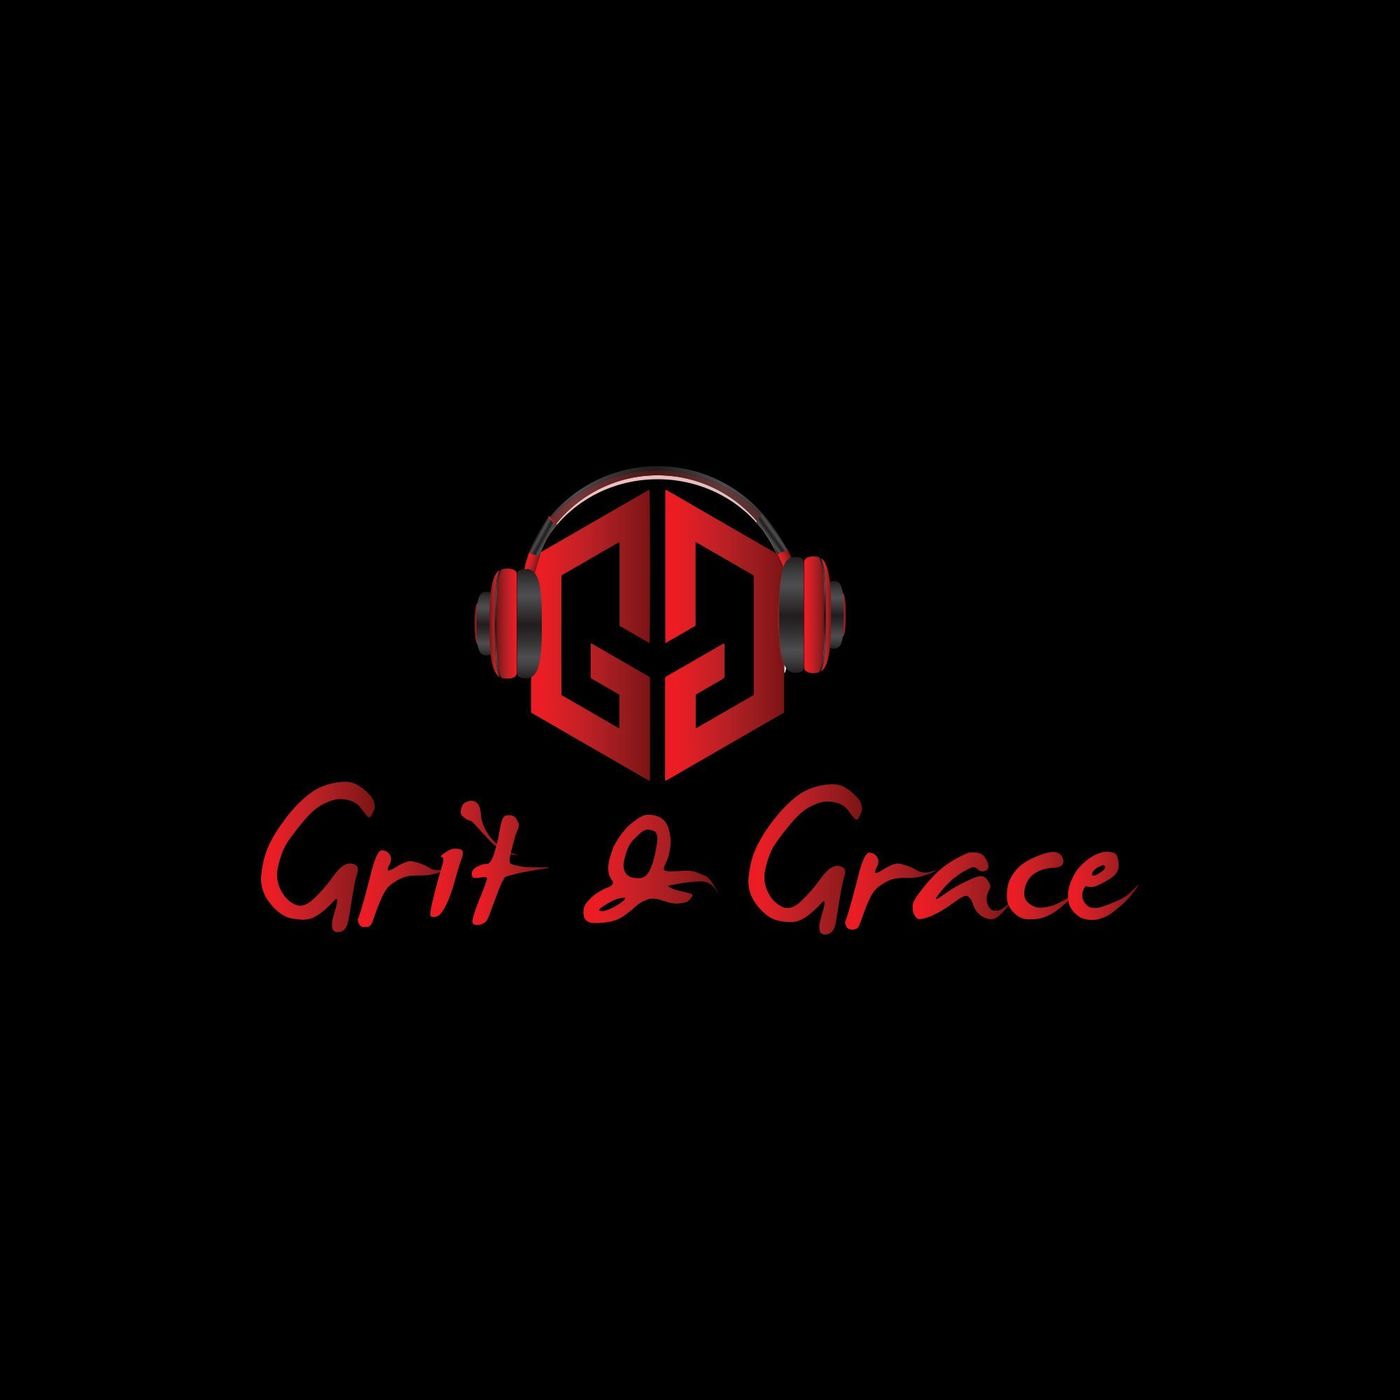 Grit and Grace: Marketing and Branding Tactics